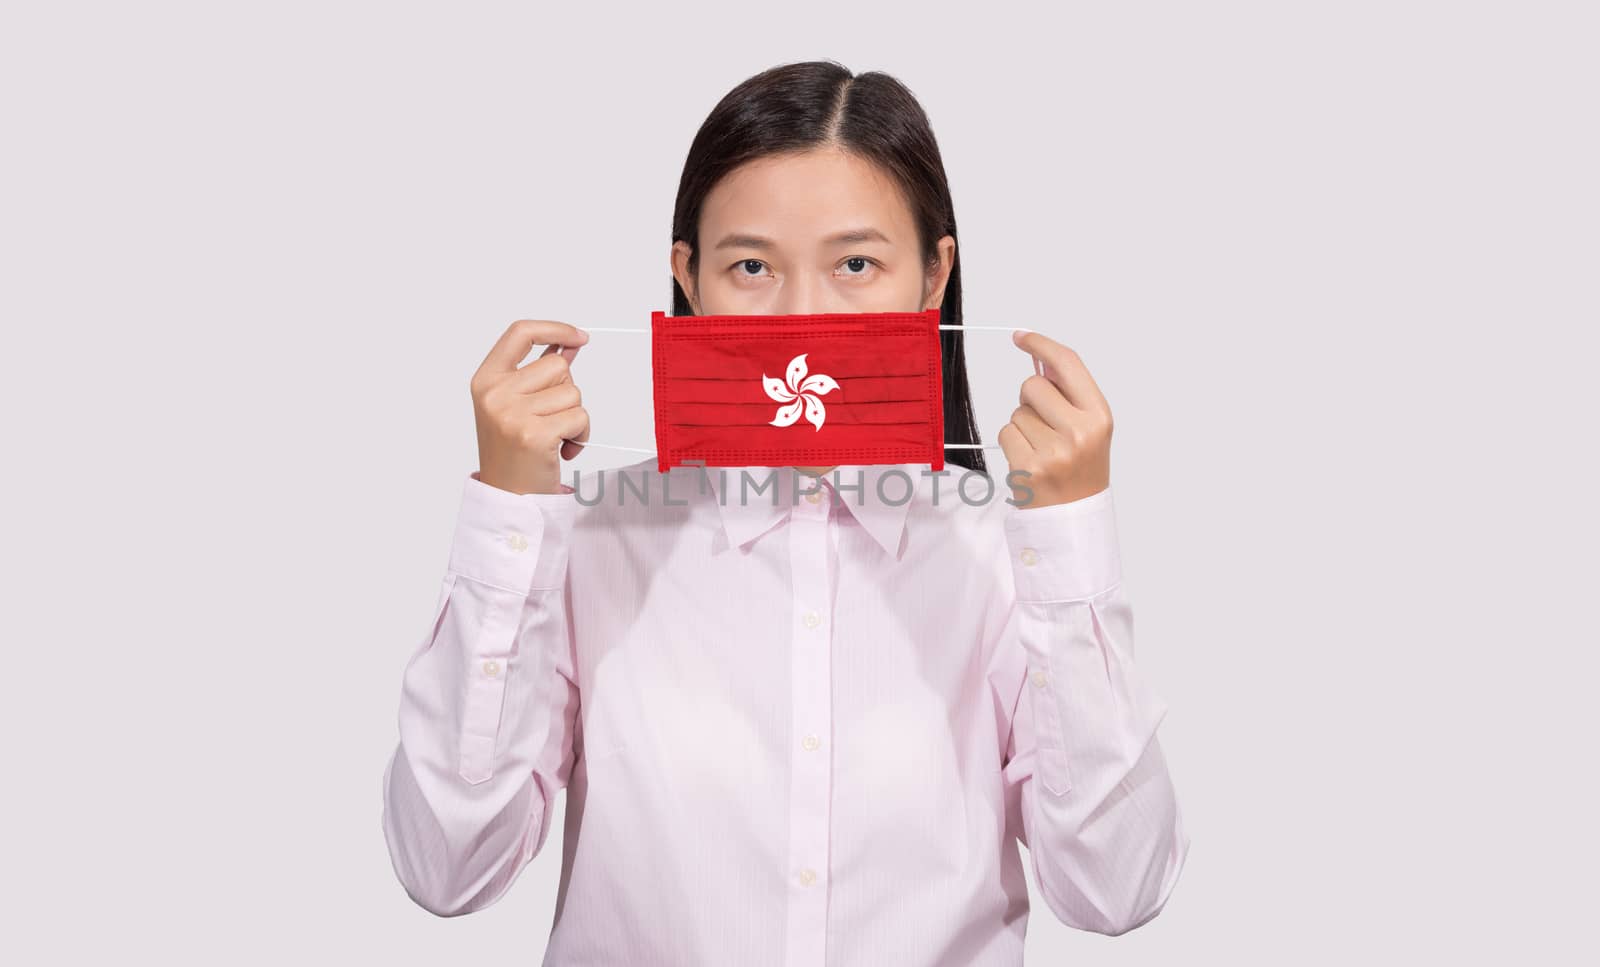 Asian woman wearing hygienic face mask painting Hong Kong flag to protect from the Coronavirus 2019 (COVID-19) infection outbreak situation, the virus originated from Wuhan, China.